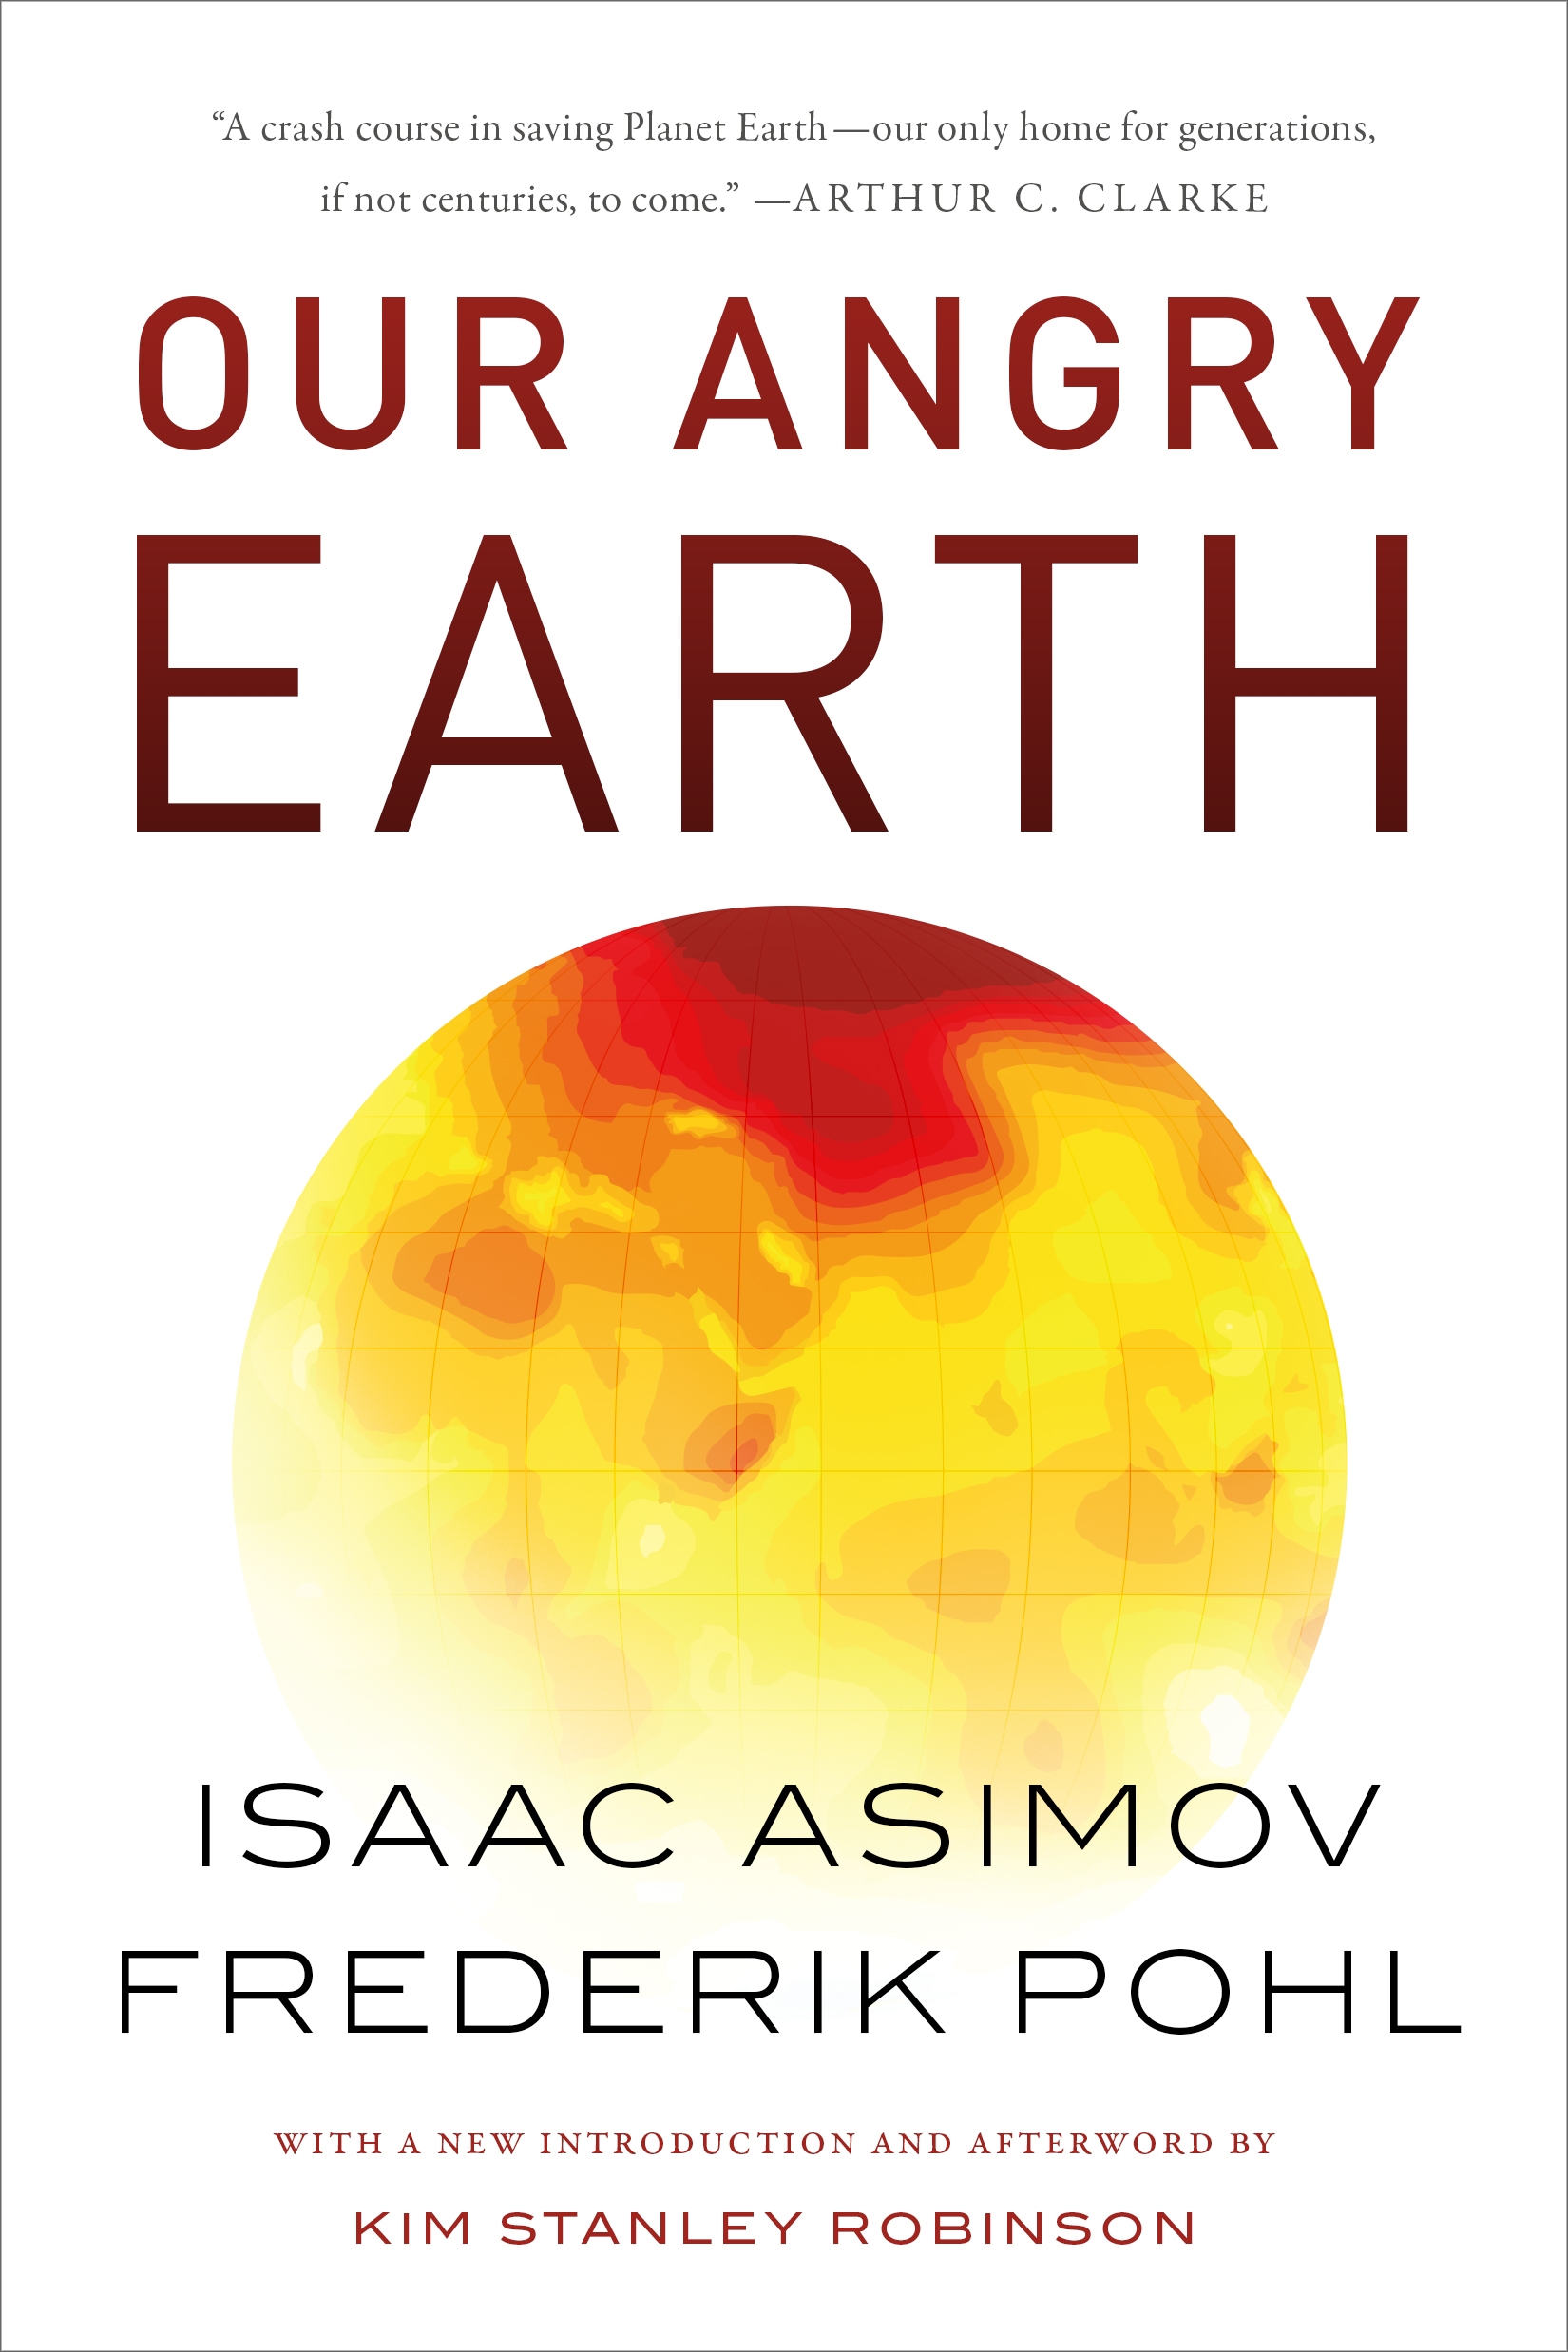 Our Angry Earth by Isaac Asimov, Frederik Pohl